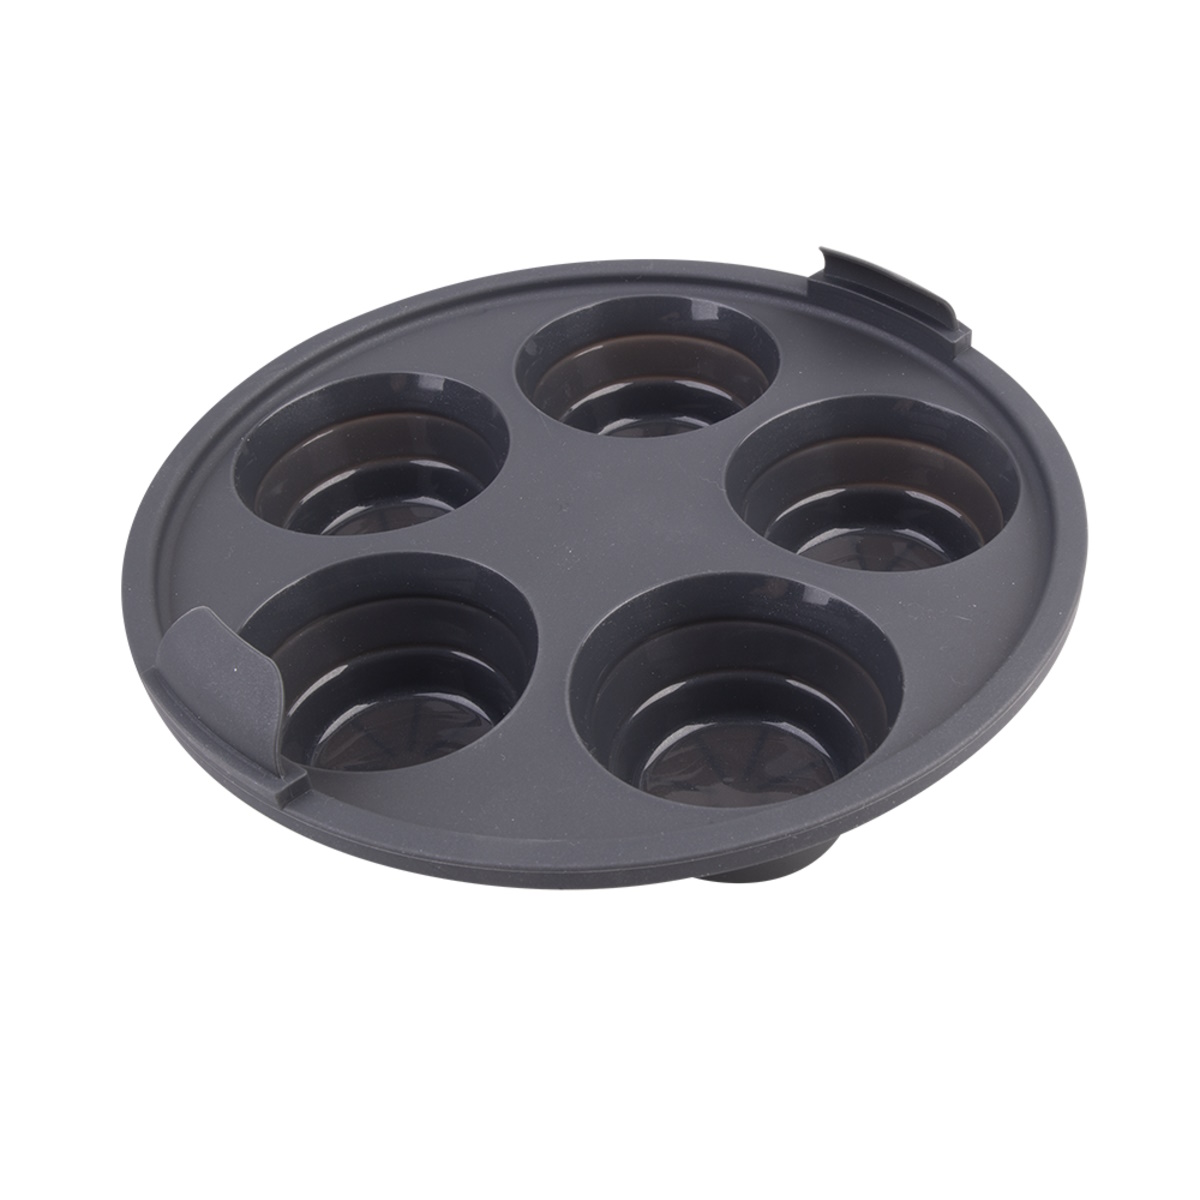 Daily Bake Silicone Round Collapsible Air Fryer 5 Cup Muffin Pan 22cm Dia. - Charcoal